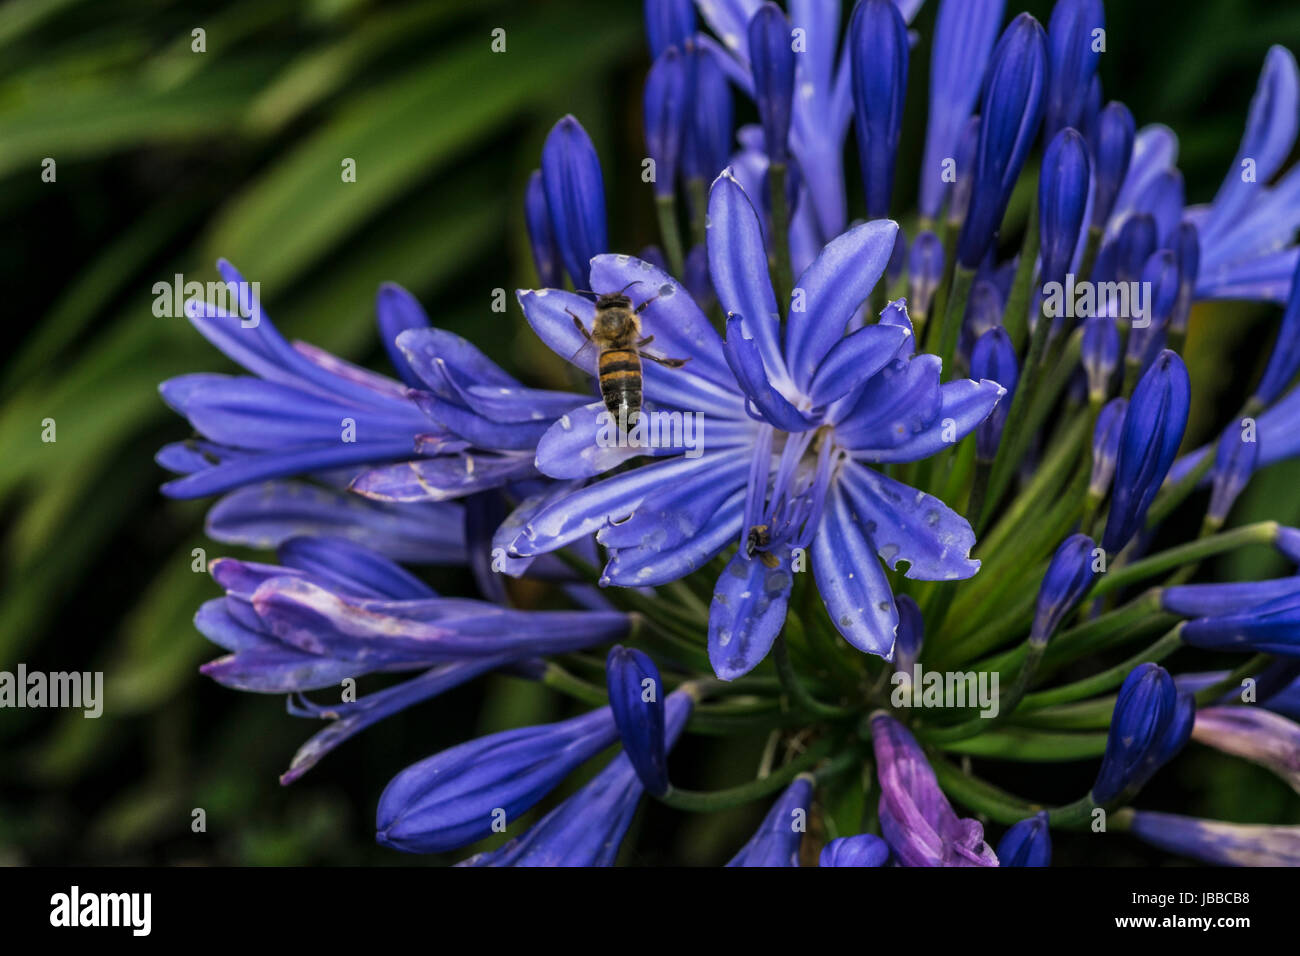 Bee on violet blue flowers in a garden Stock Photo